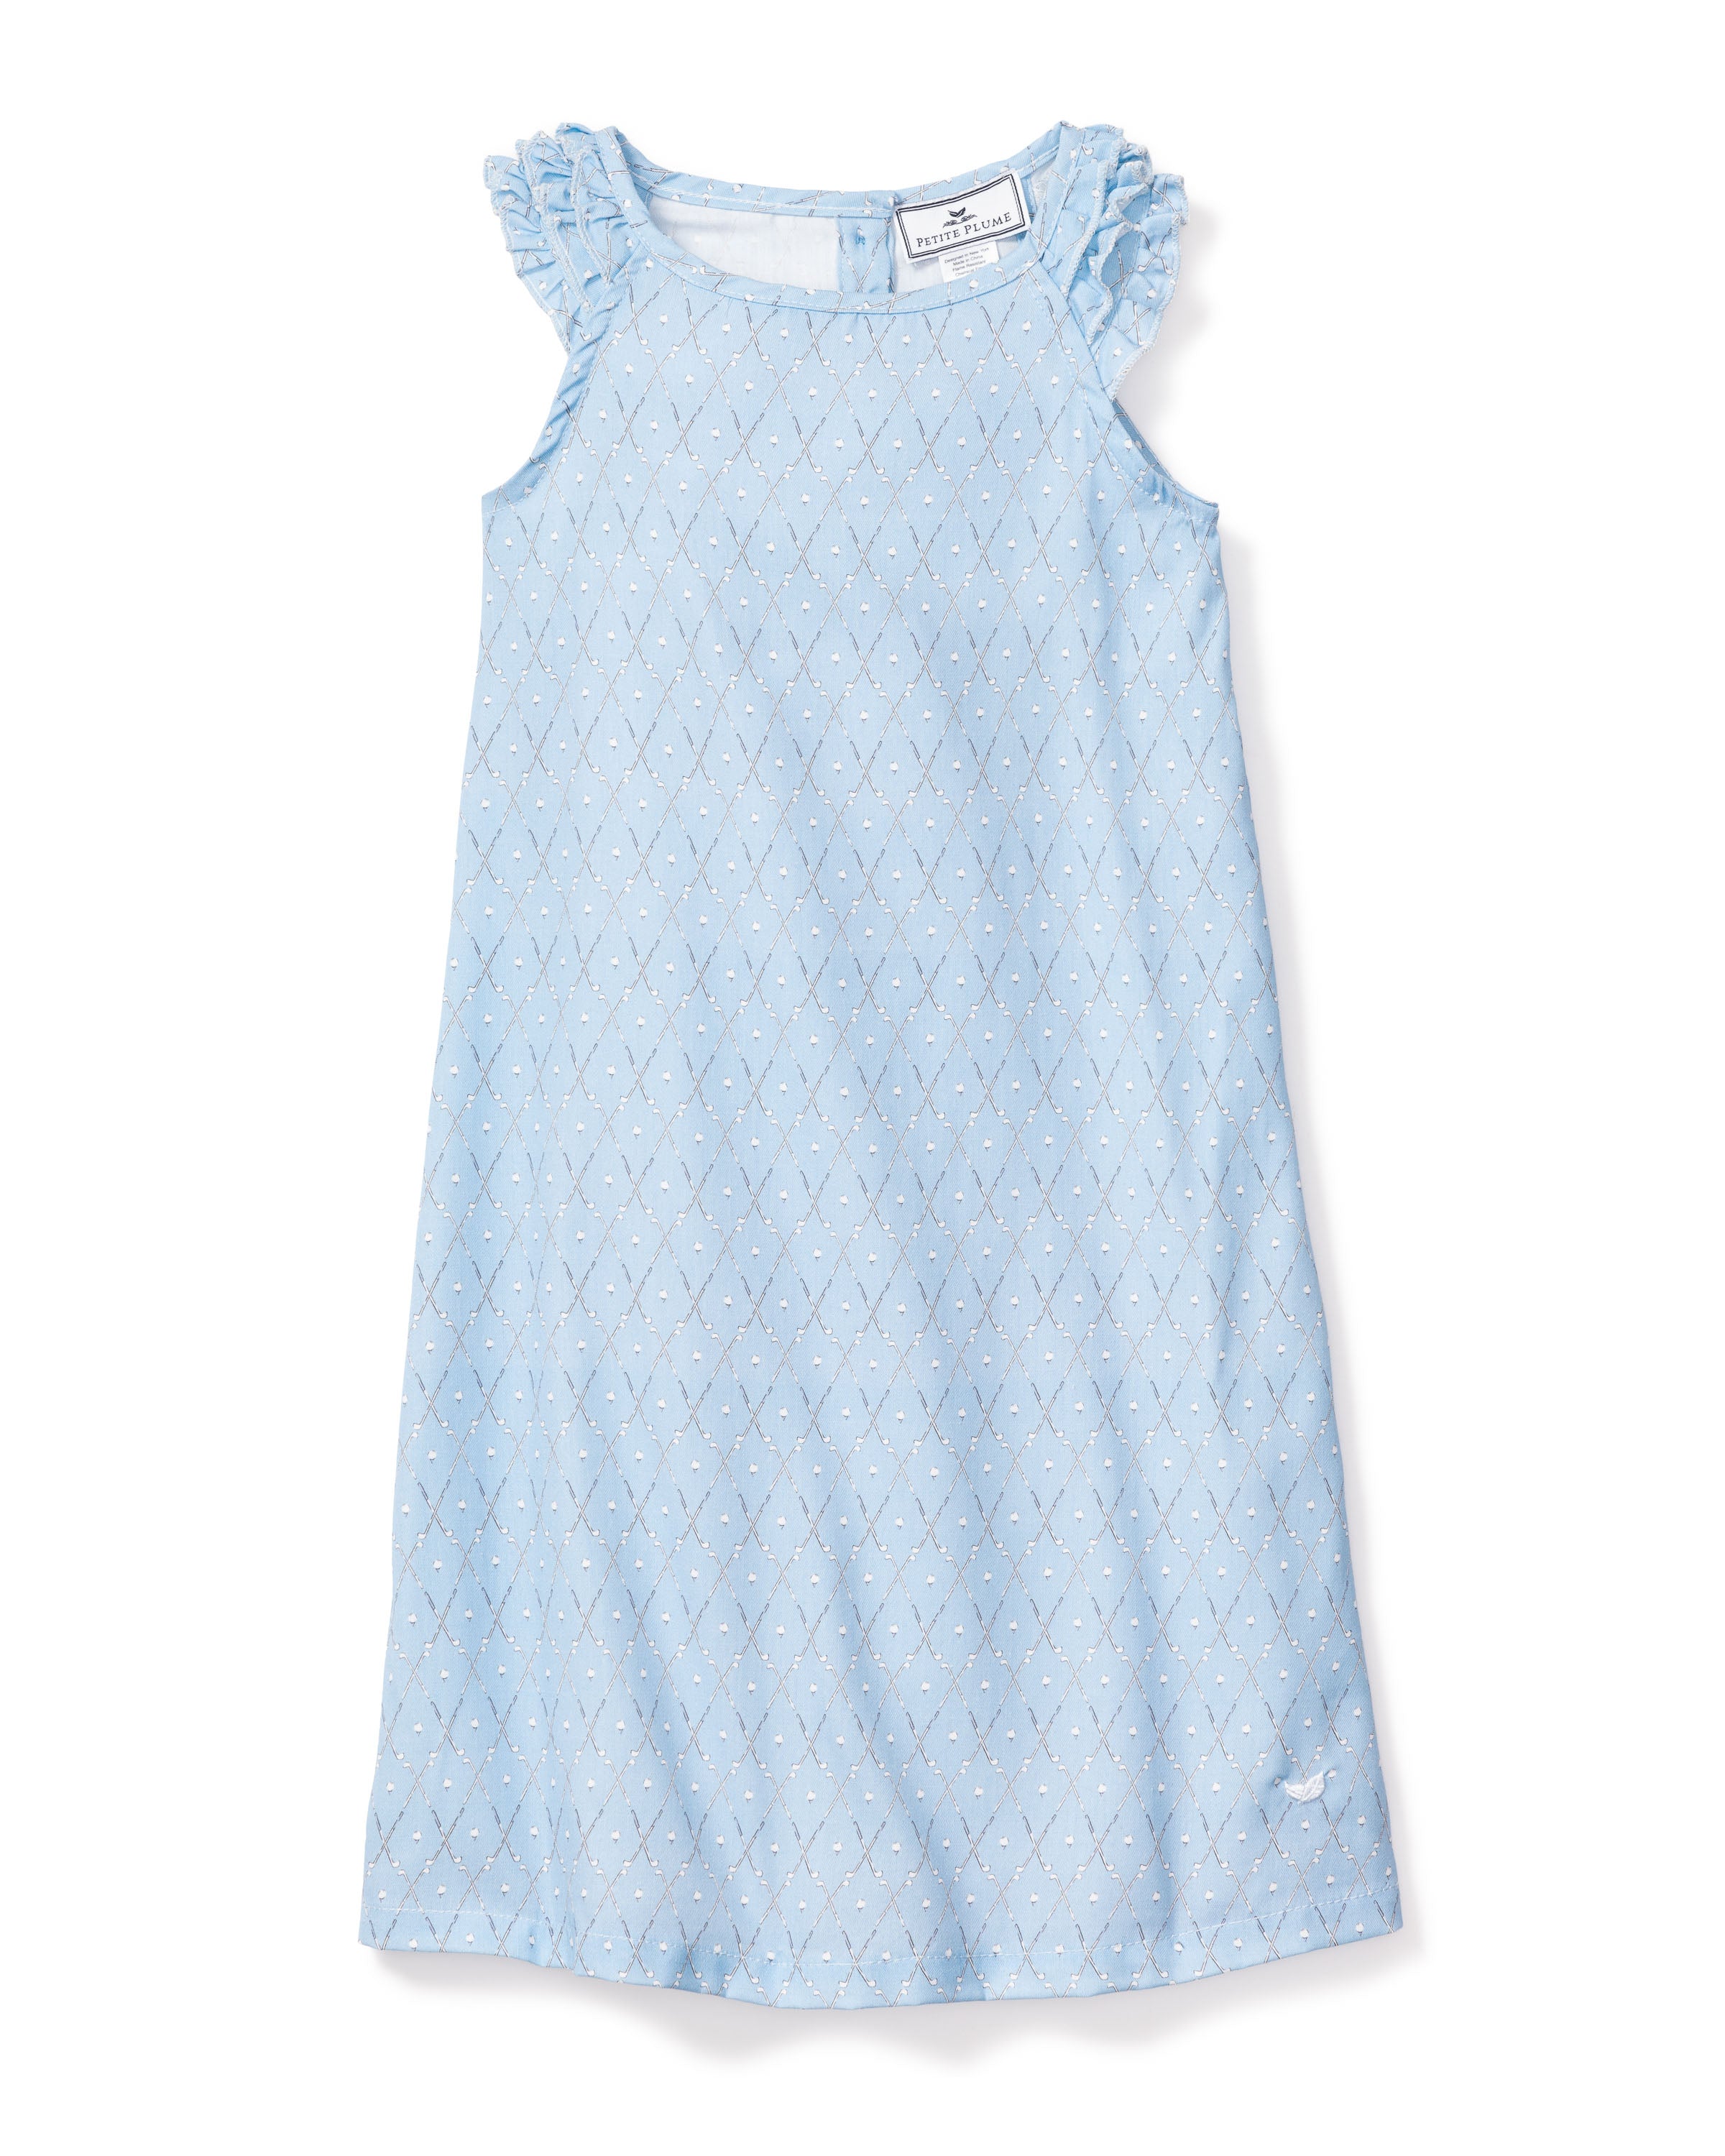 Girl's Twill Amelie Nightgown in St. Andrews Tee Time